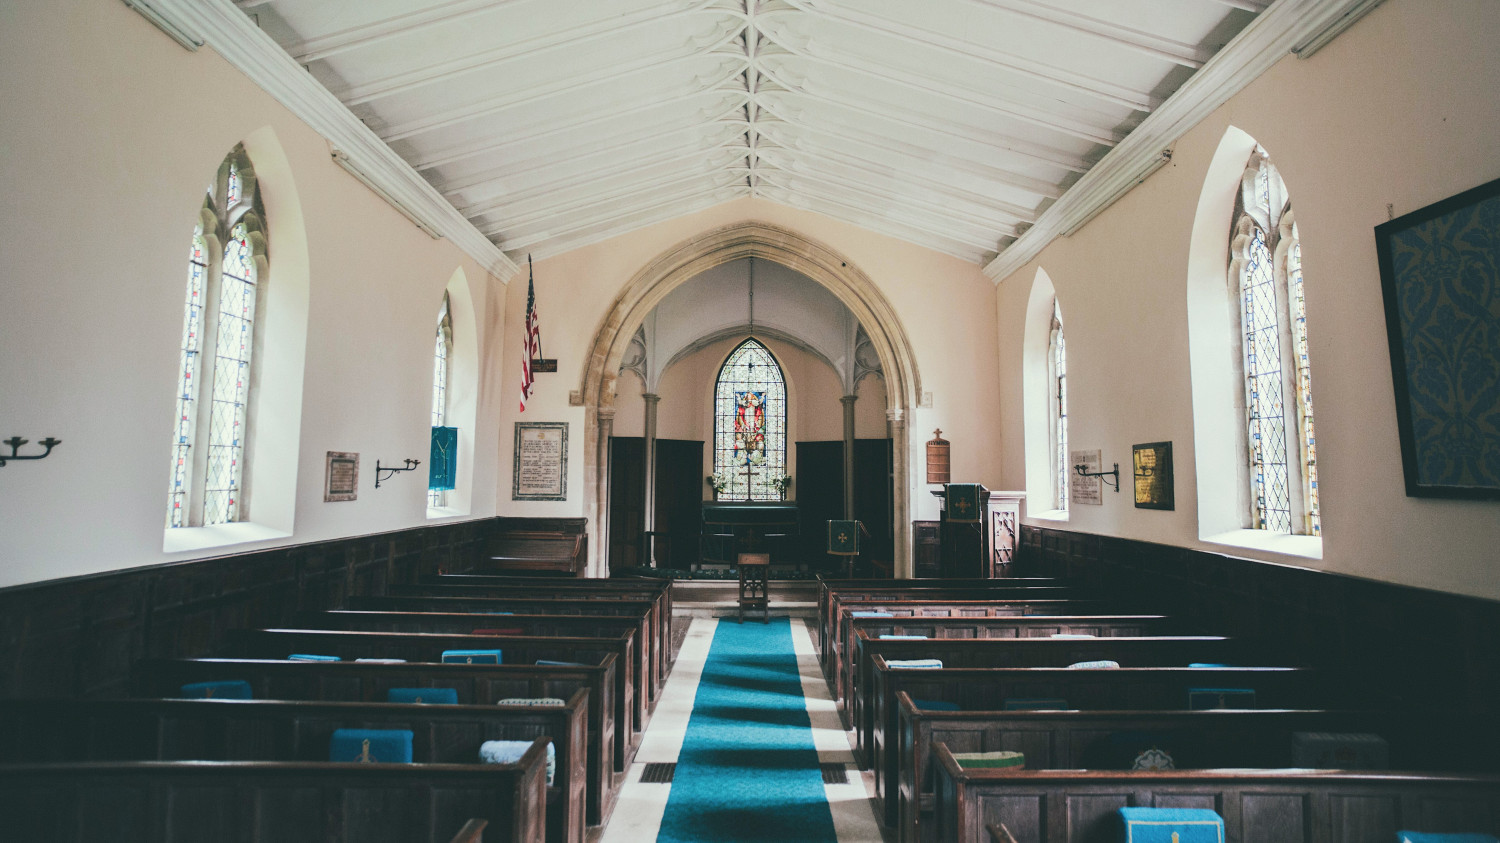 Image of the inside of a church